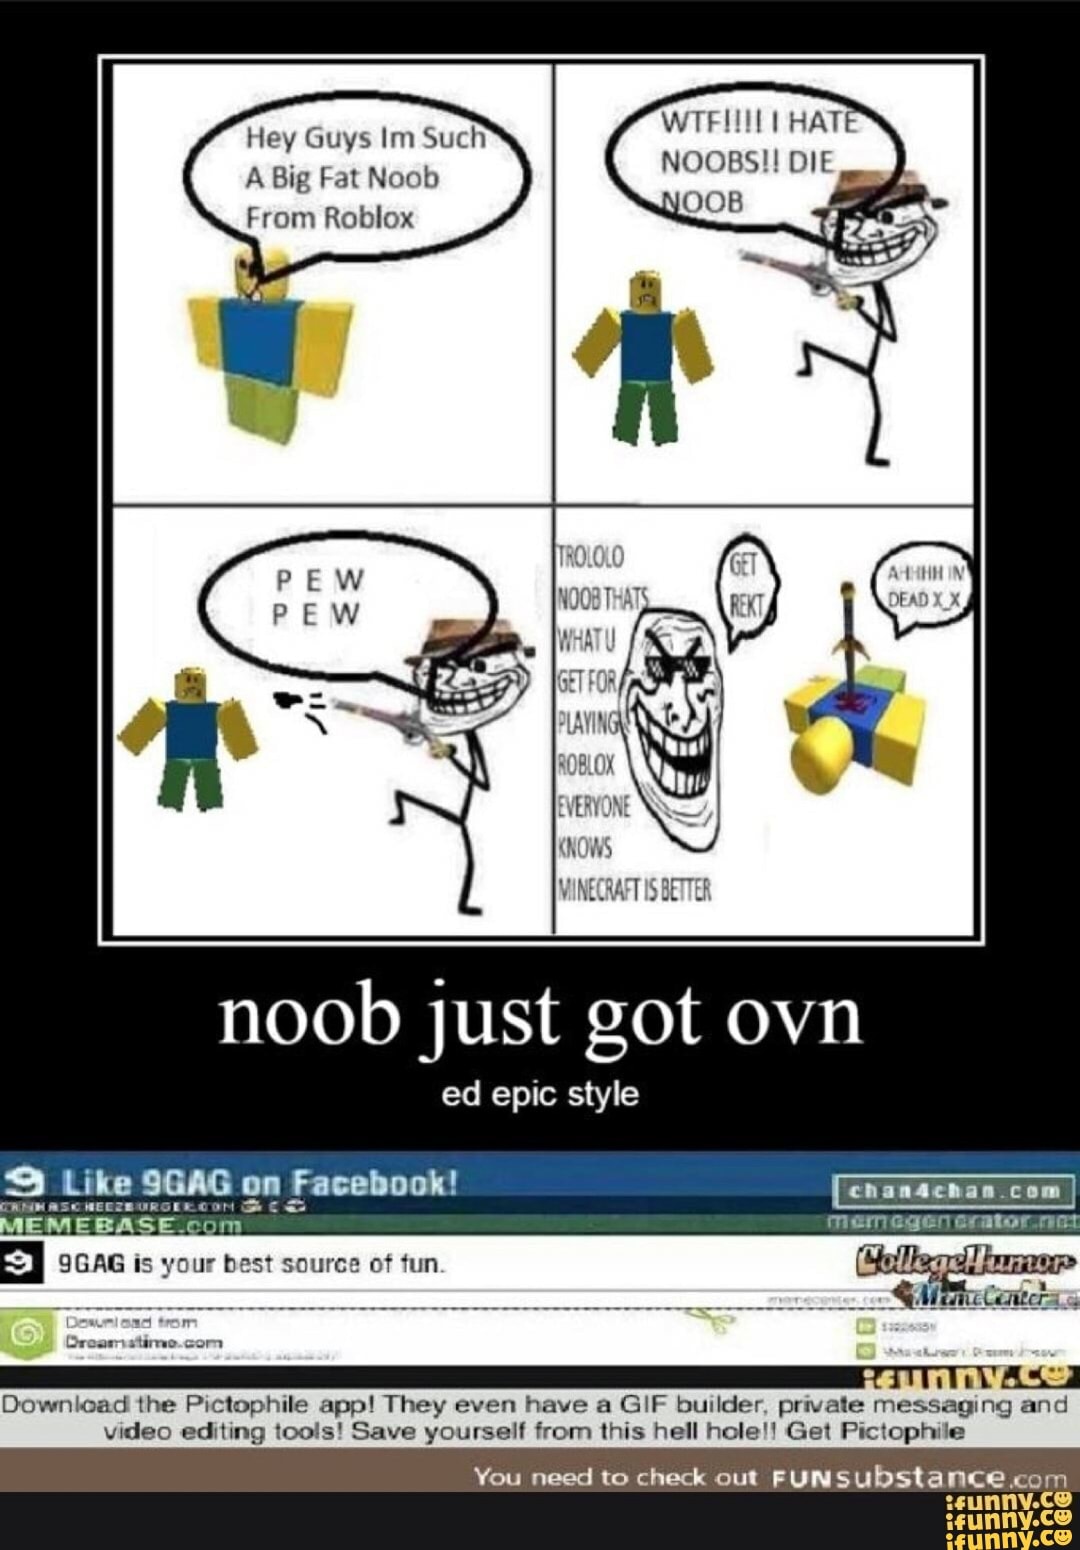 Hey Guys Im Such A Big Fat Noob From Roblox Noob Just Got Ovn I N Mi Download The Plclophile App They Even Have A Gif Bwlder Pnvale Messaging And Wdeo Editing - roblox dead noob